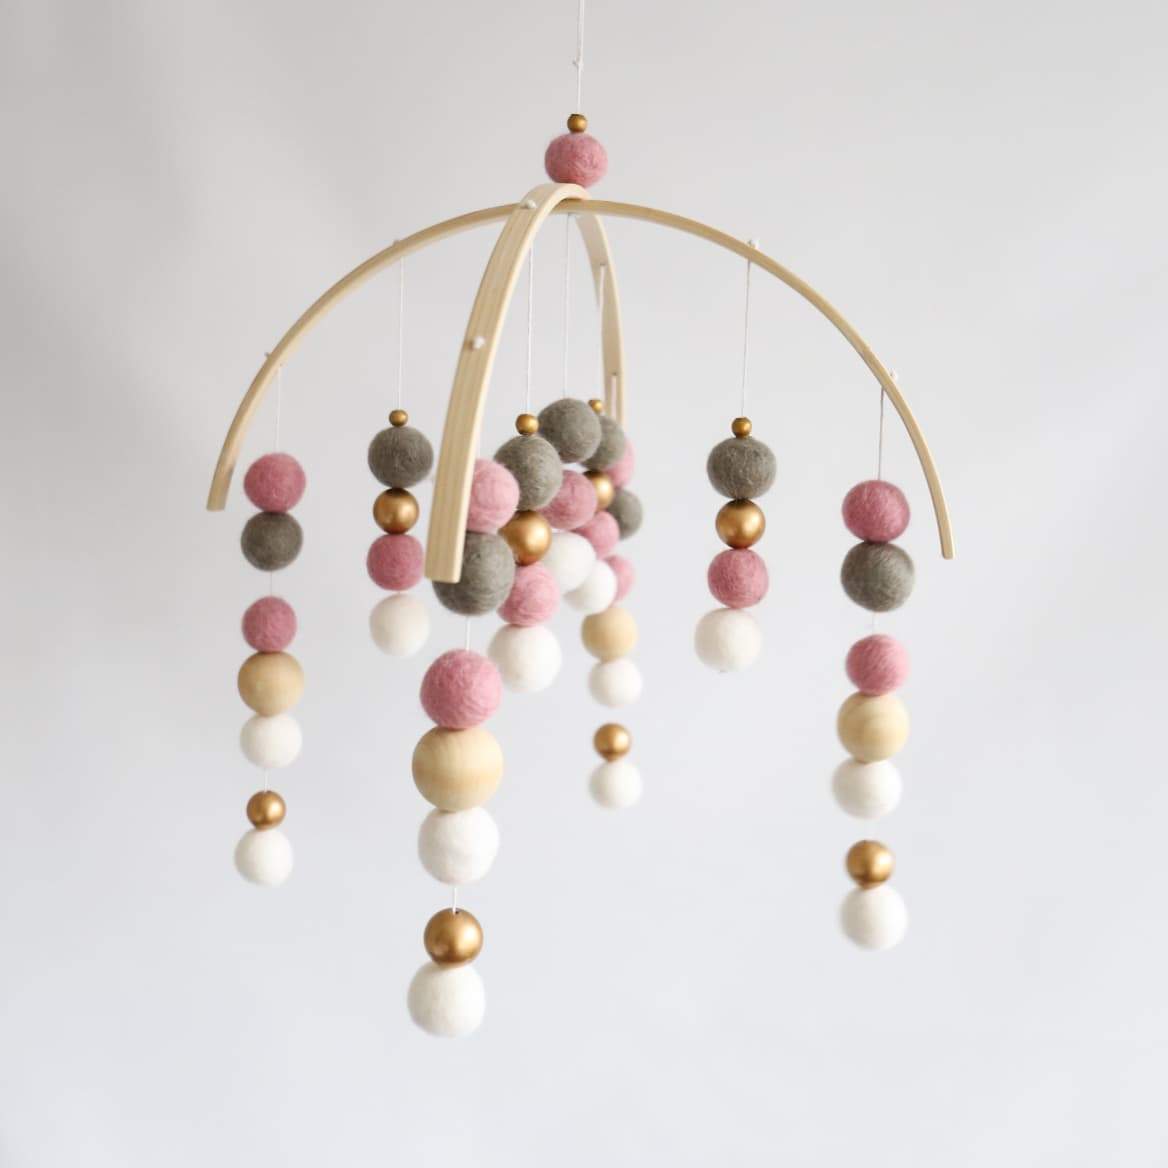 White, Grey, Dusty Pink, Gold, Raw Round Felt Ball Mobile